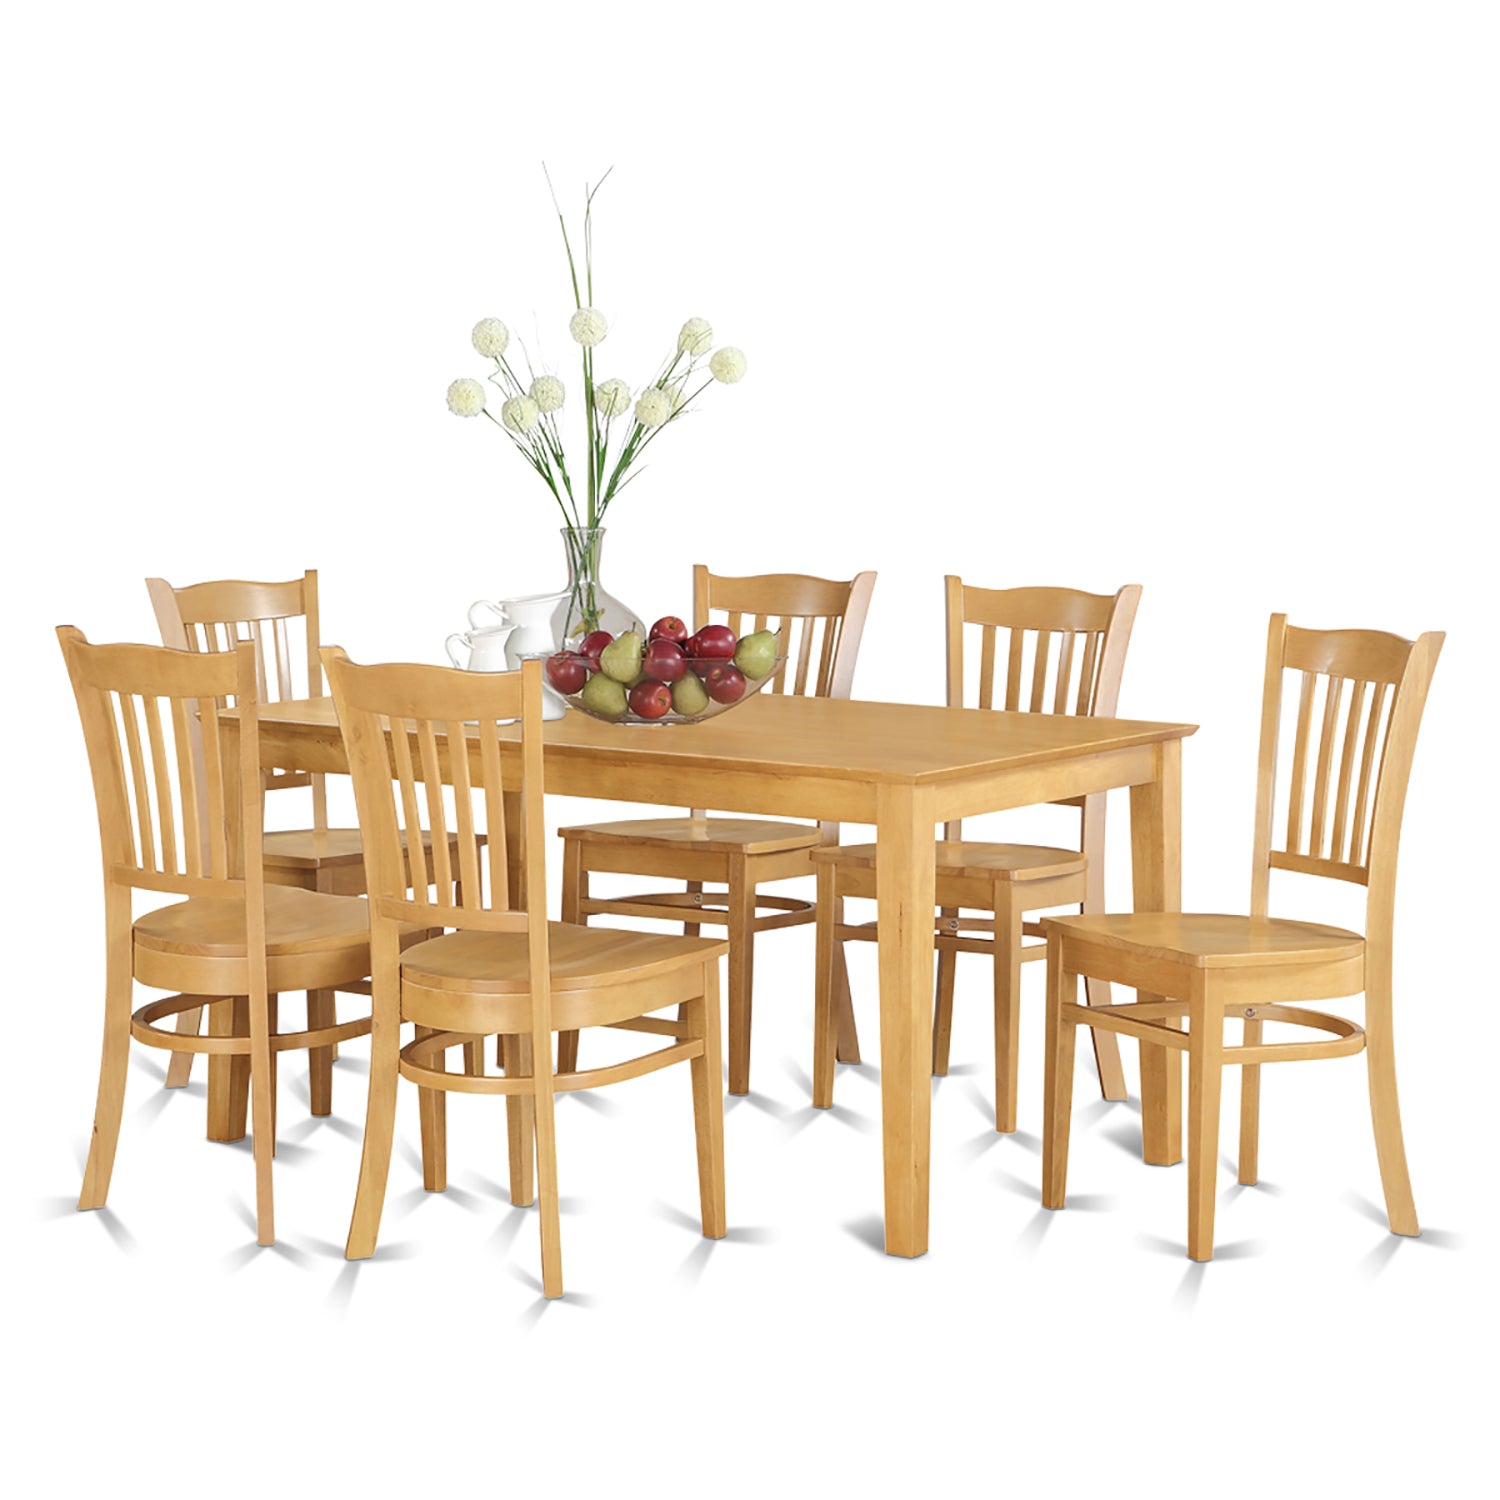 CAGR7-OAK-W 7 Pc Dining room set - Dinette Table and 6 Kitchen Chairs